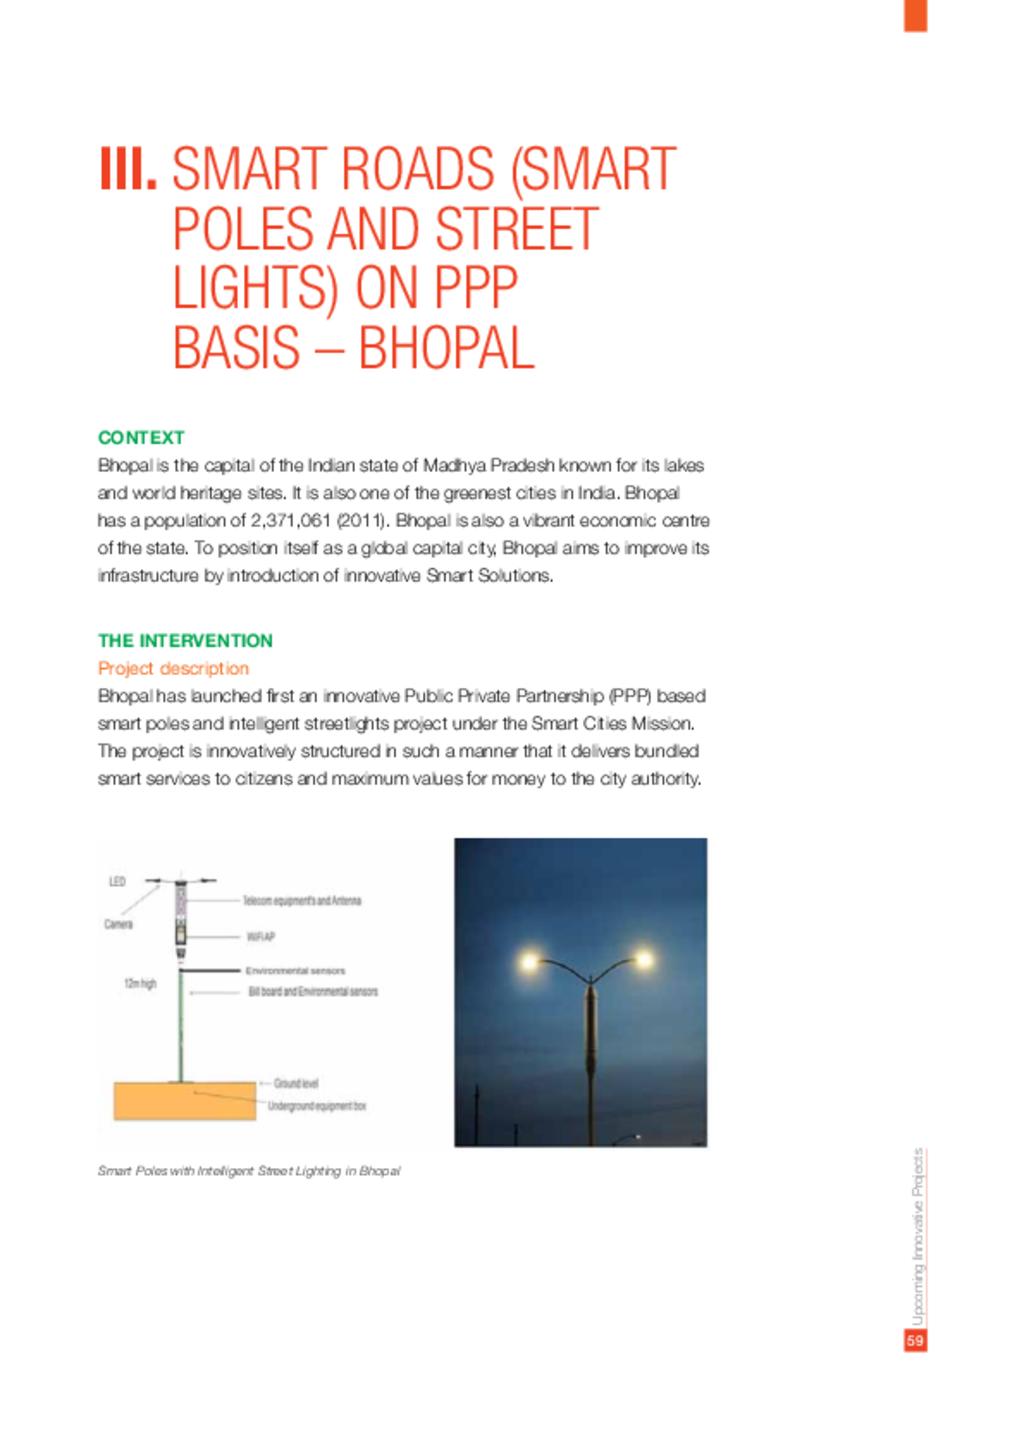 Smart Roads (Smart Poles And Street Lights) On PPP Basis – Bhopal